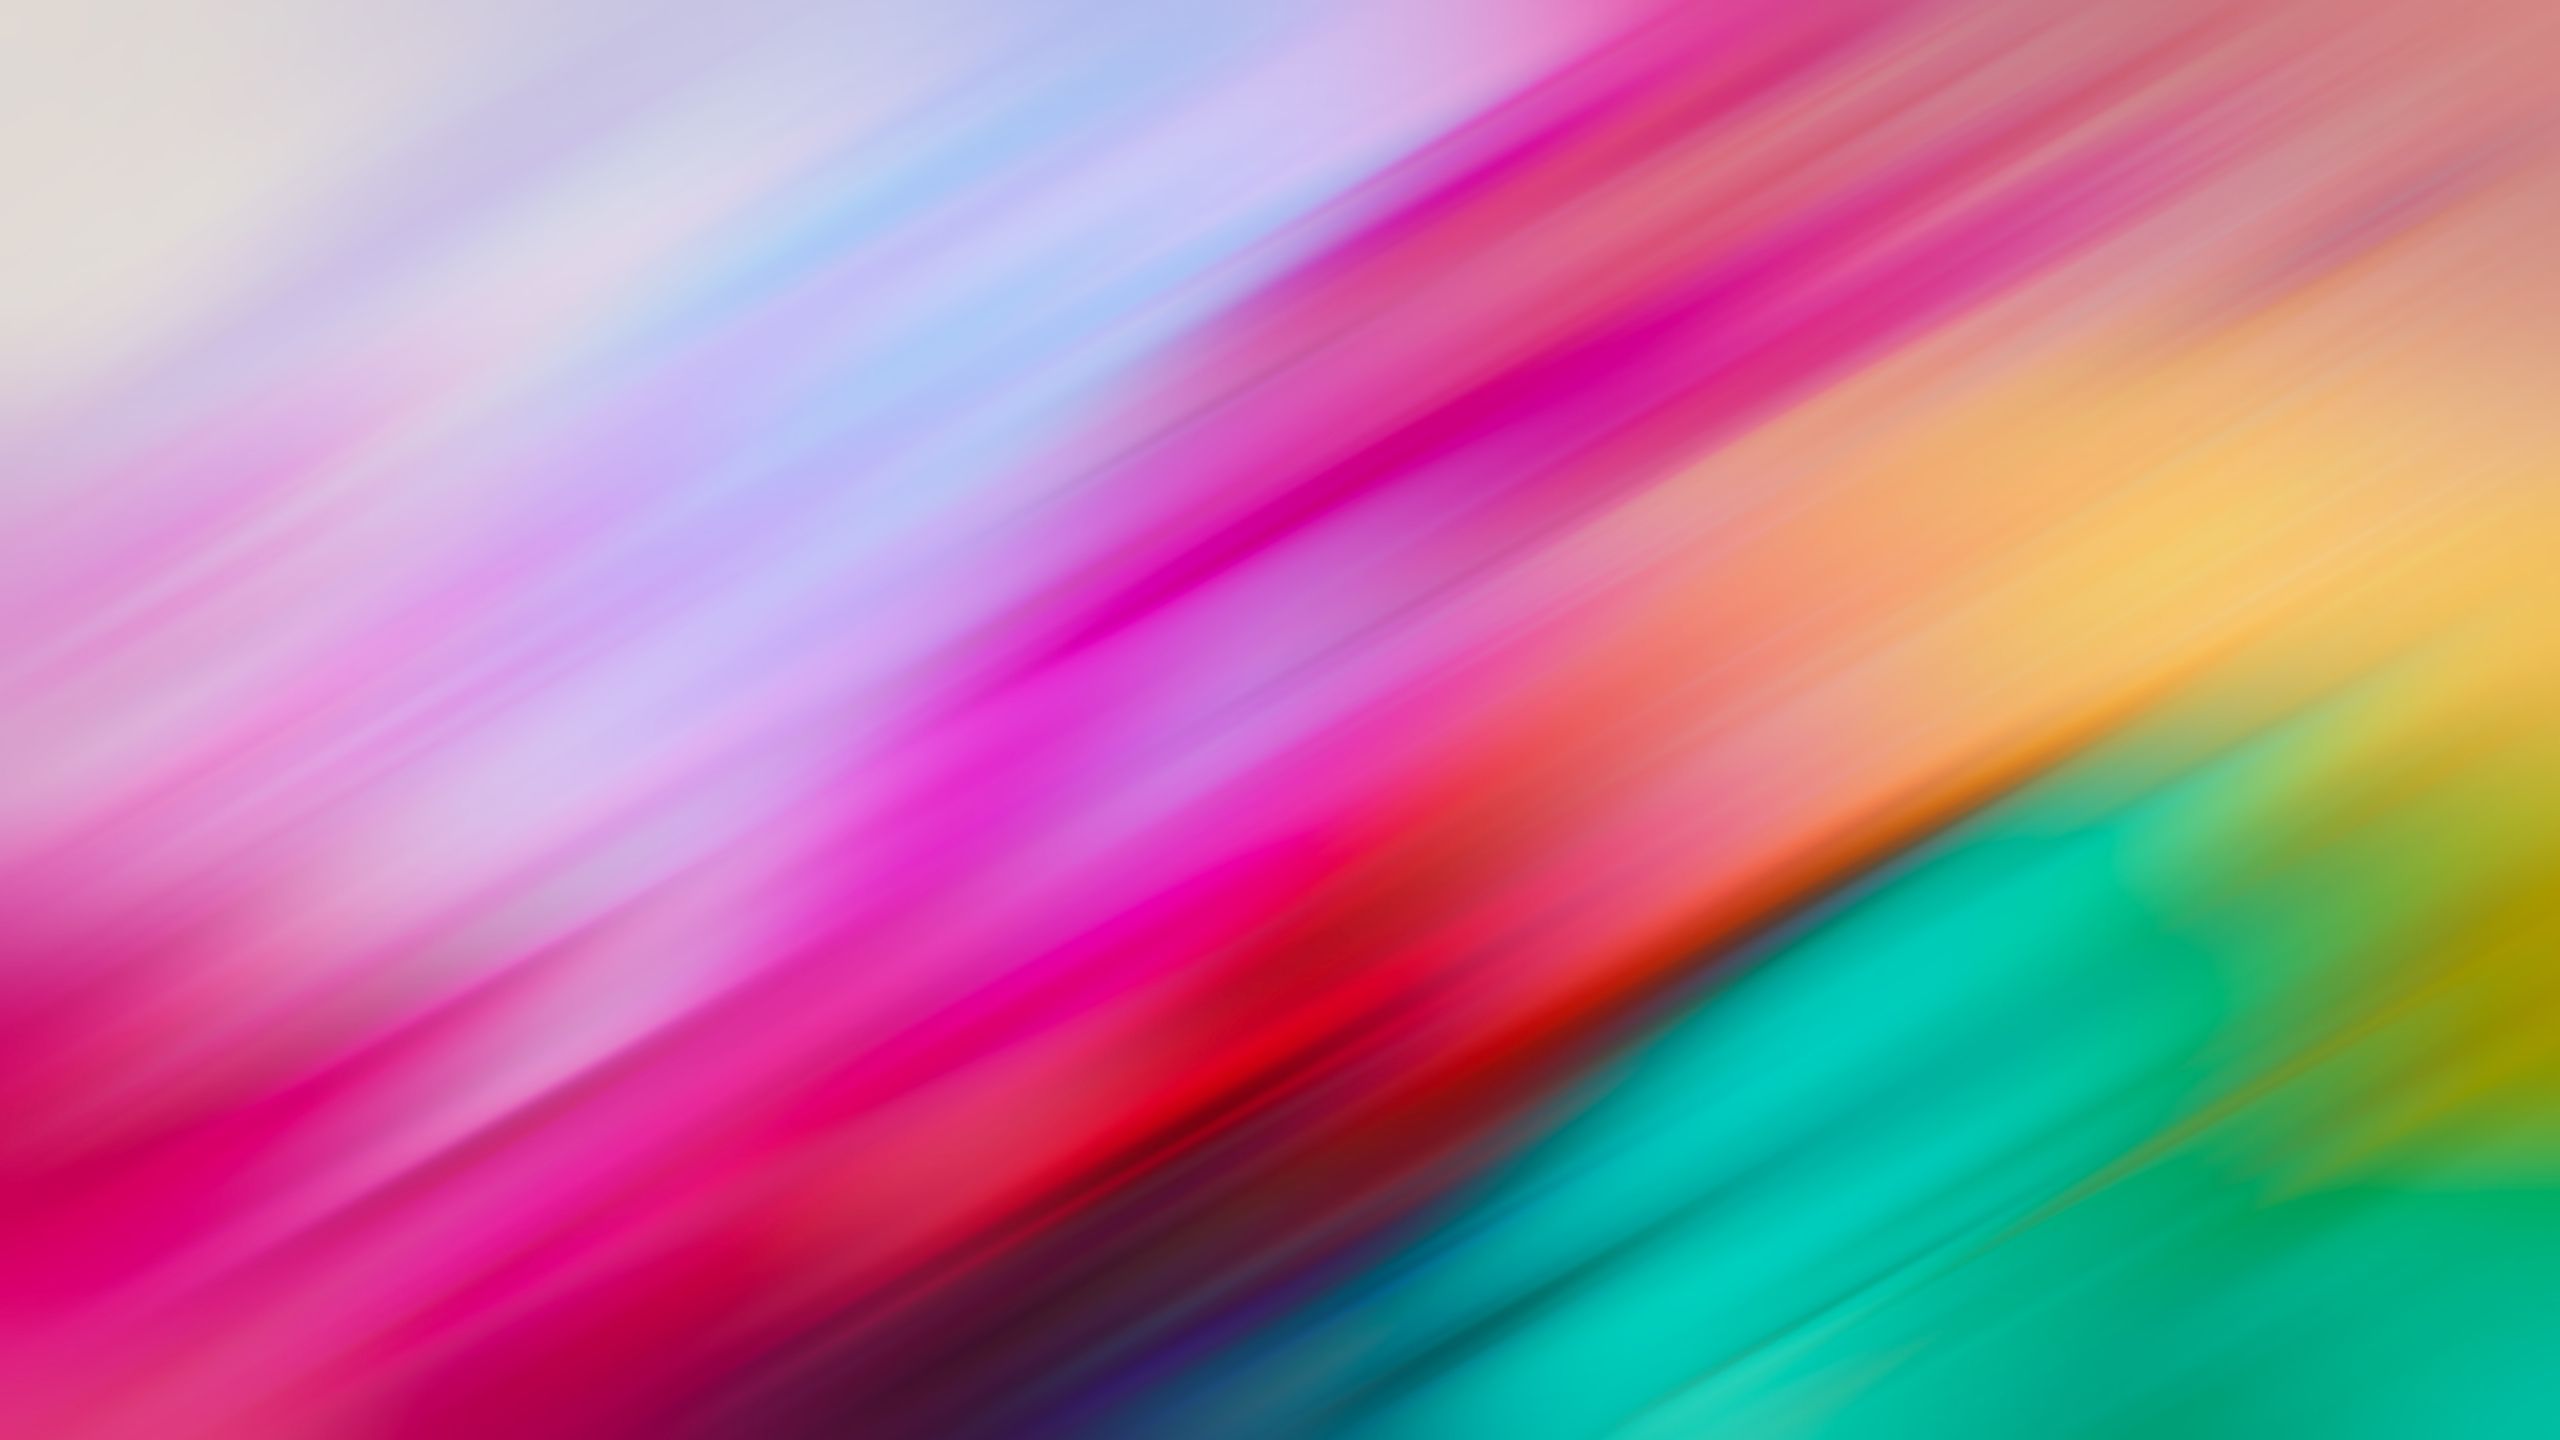 Pink And Yellow HD Abstract Wallpapers - Wallpaper Cave